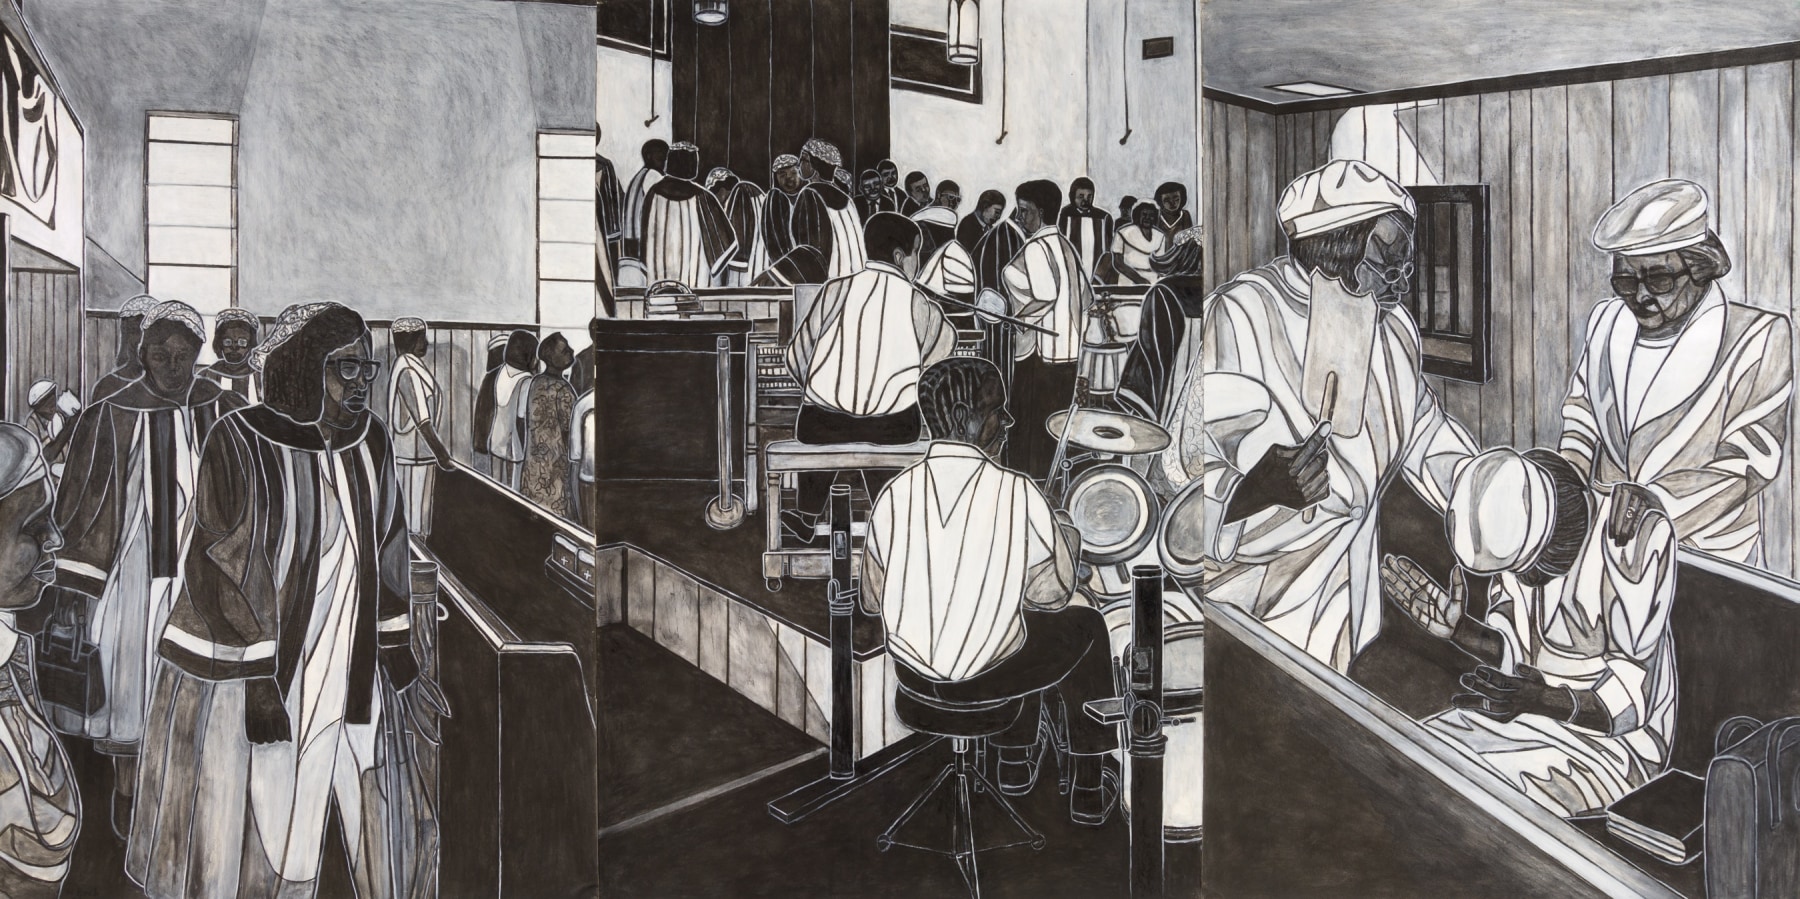 Willie Birch
Sunday Morning, 2004
Acrylic and charcoal on paper
72 x 144 inches&amp;nbsp;